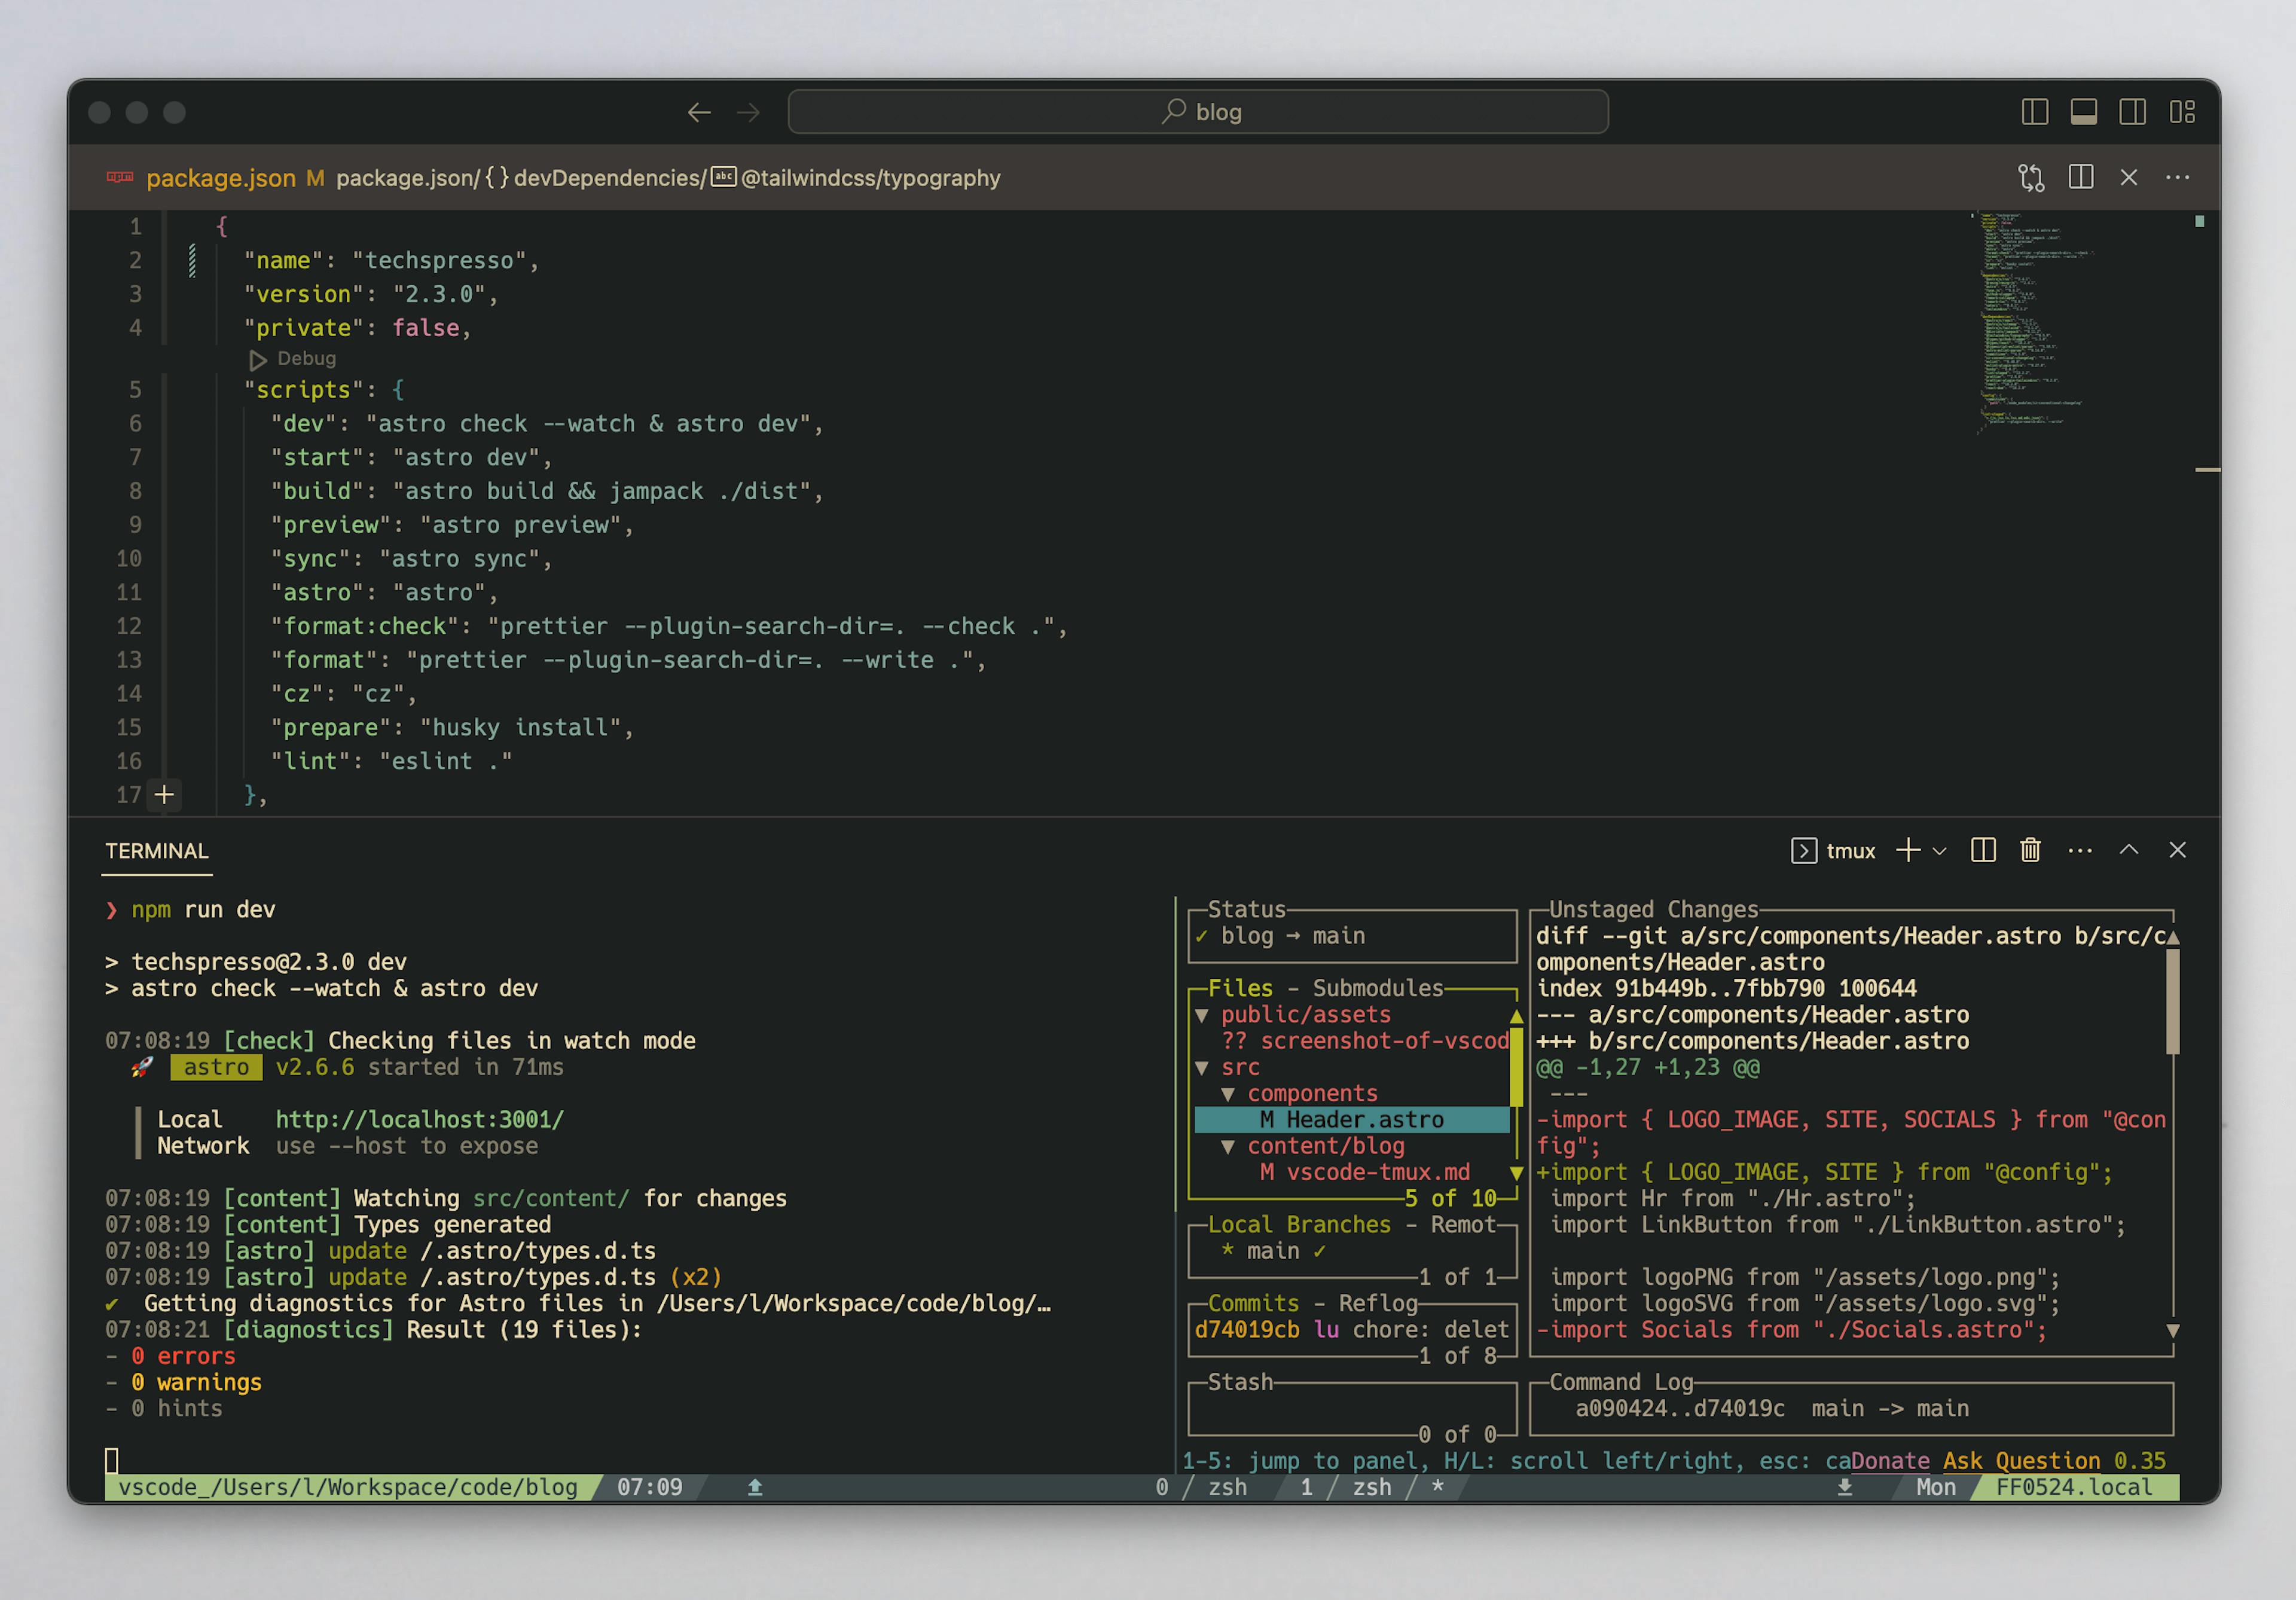 Vscode running tmux inside the integrated terminal